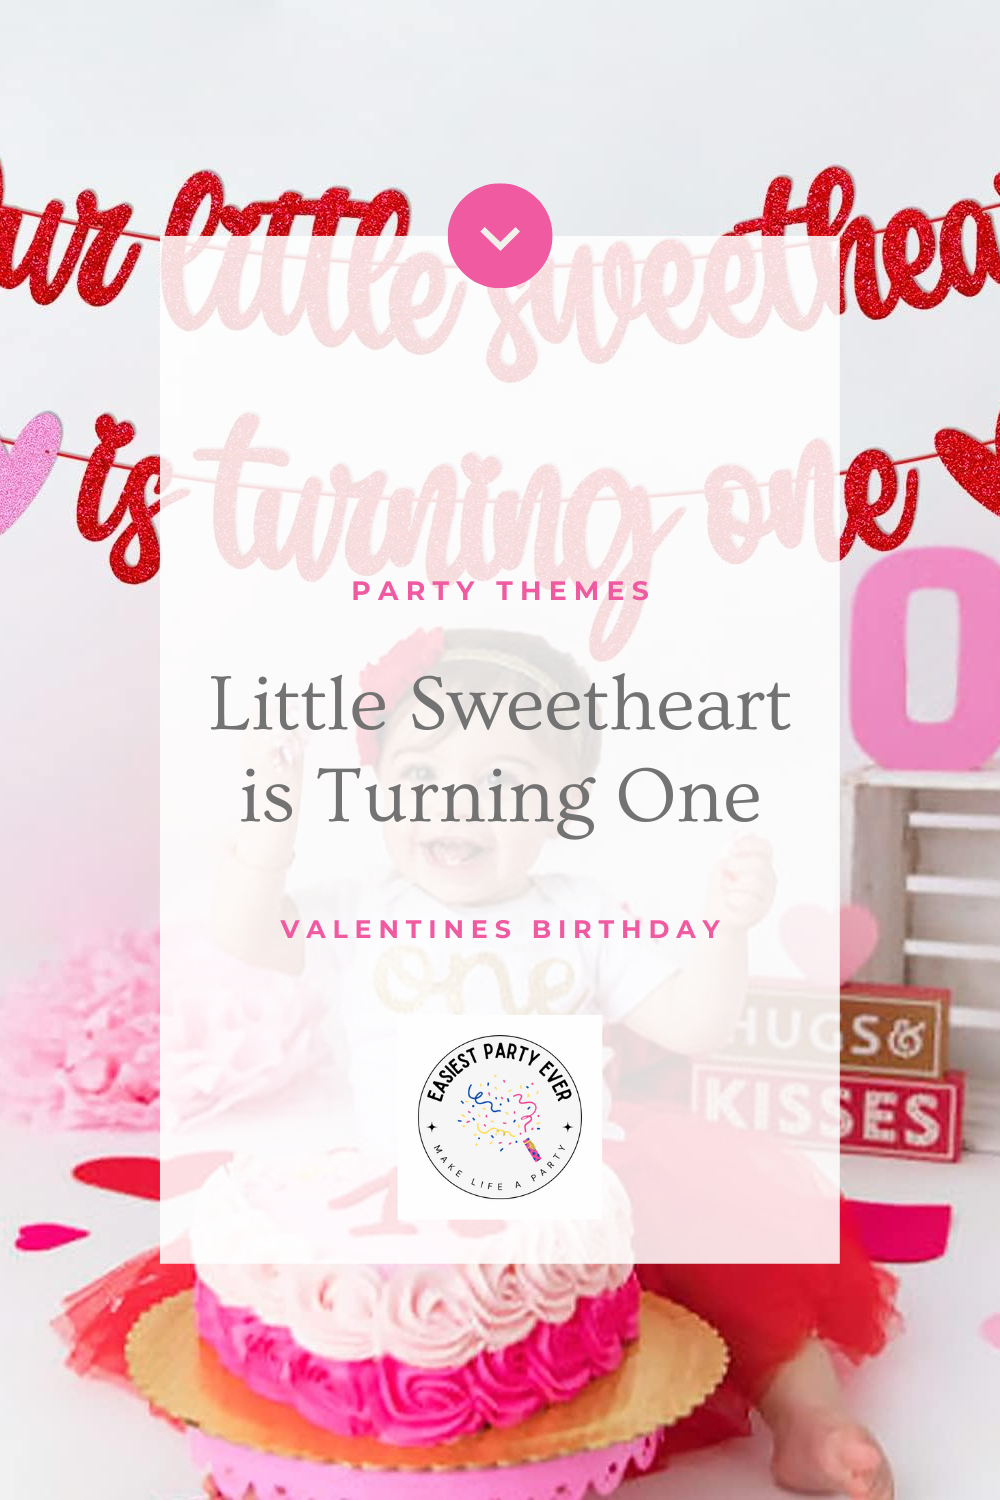 Best Valentine’s 1st Birthday Party Theme: Our Little Sweetheart is ONE!